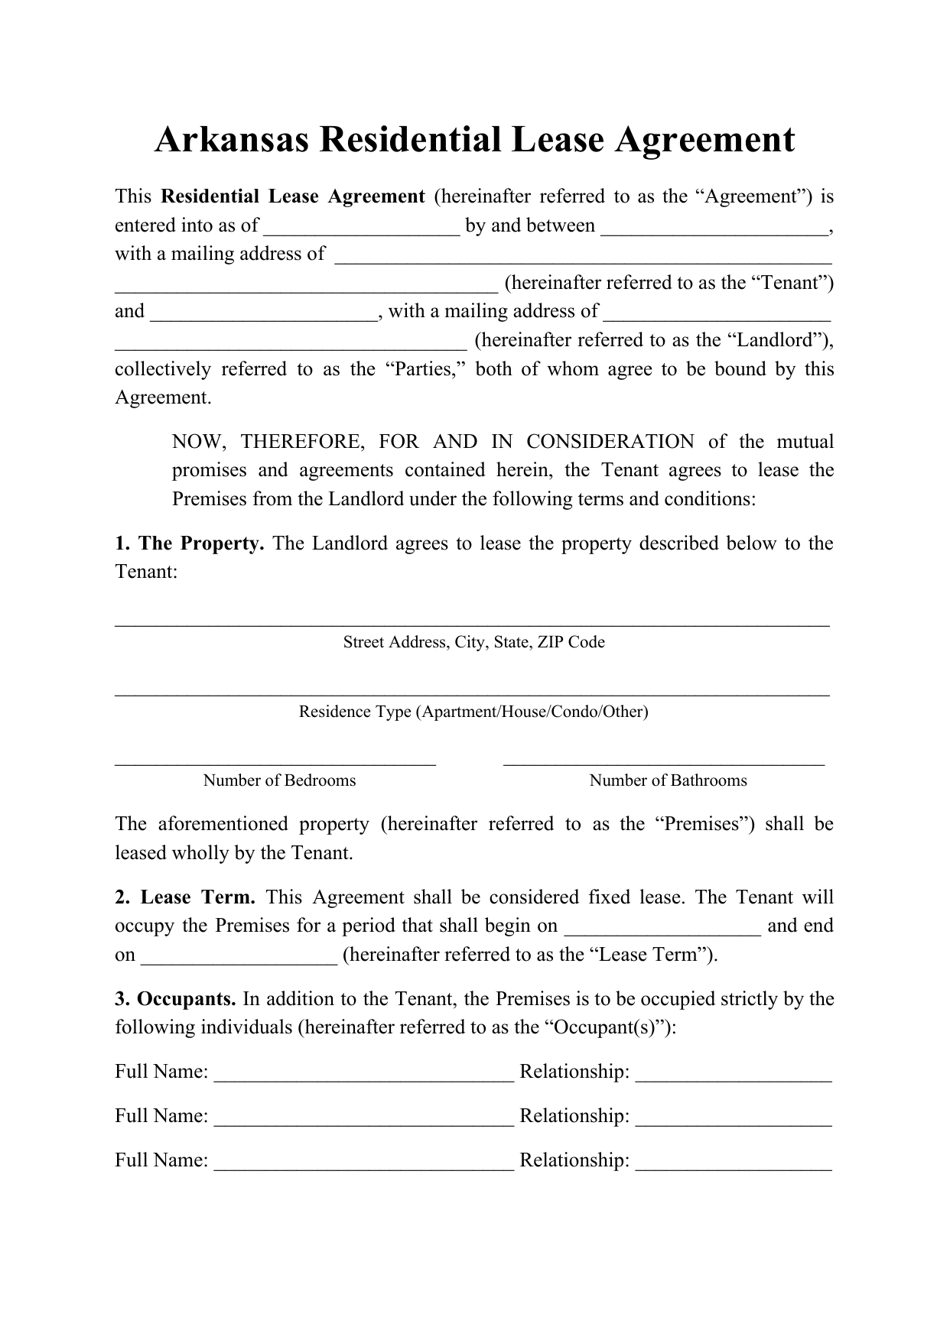 Residential Lease Agreement Template - Arkansas, Page 1